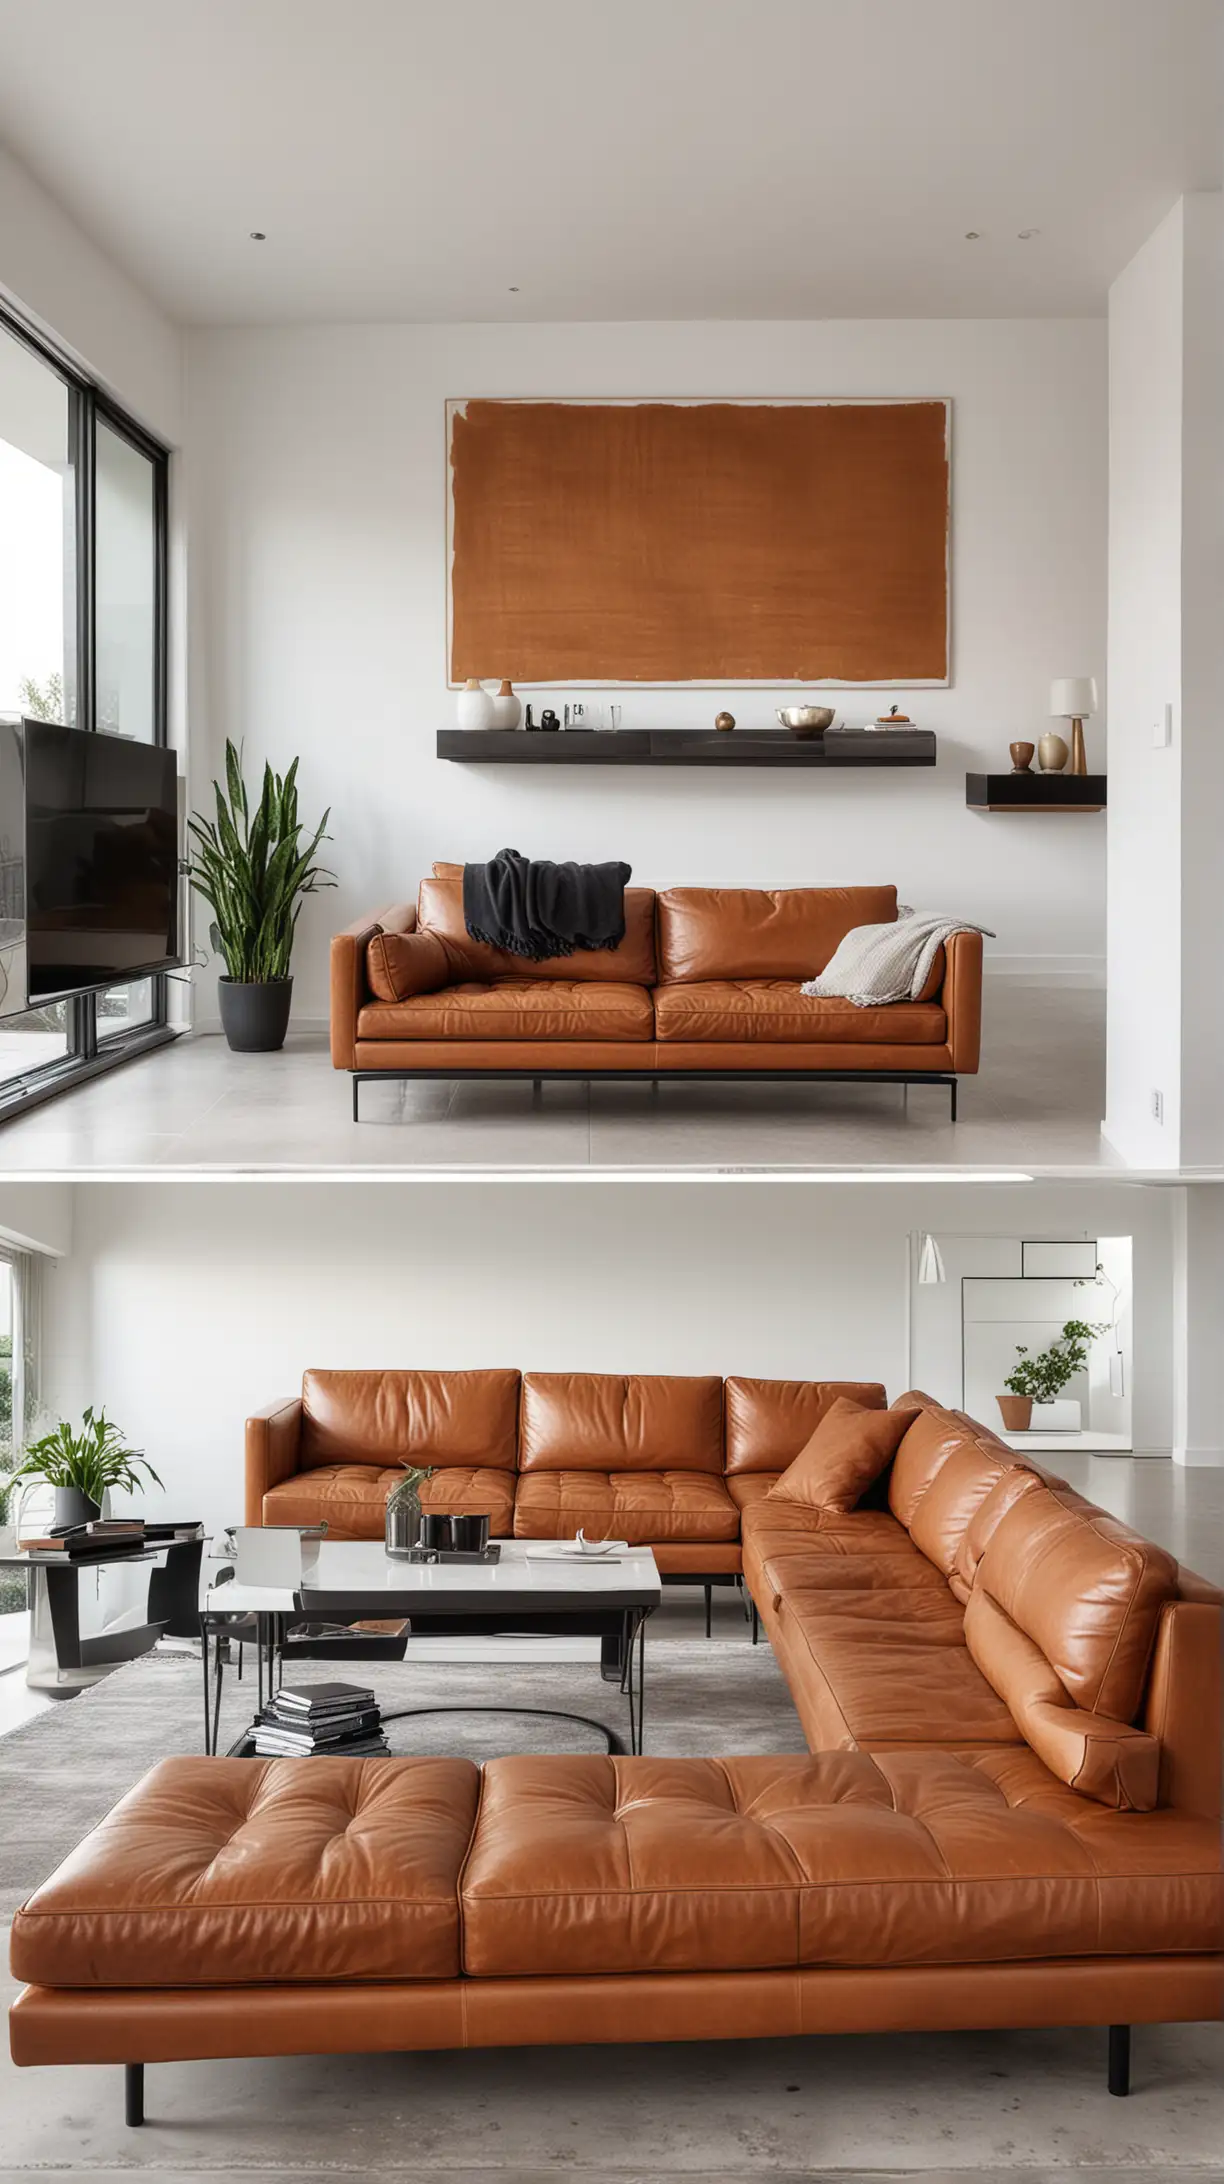 Minimalist Modern Living Room with Cognac Leather Couch and Metallic Accents